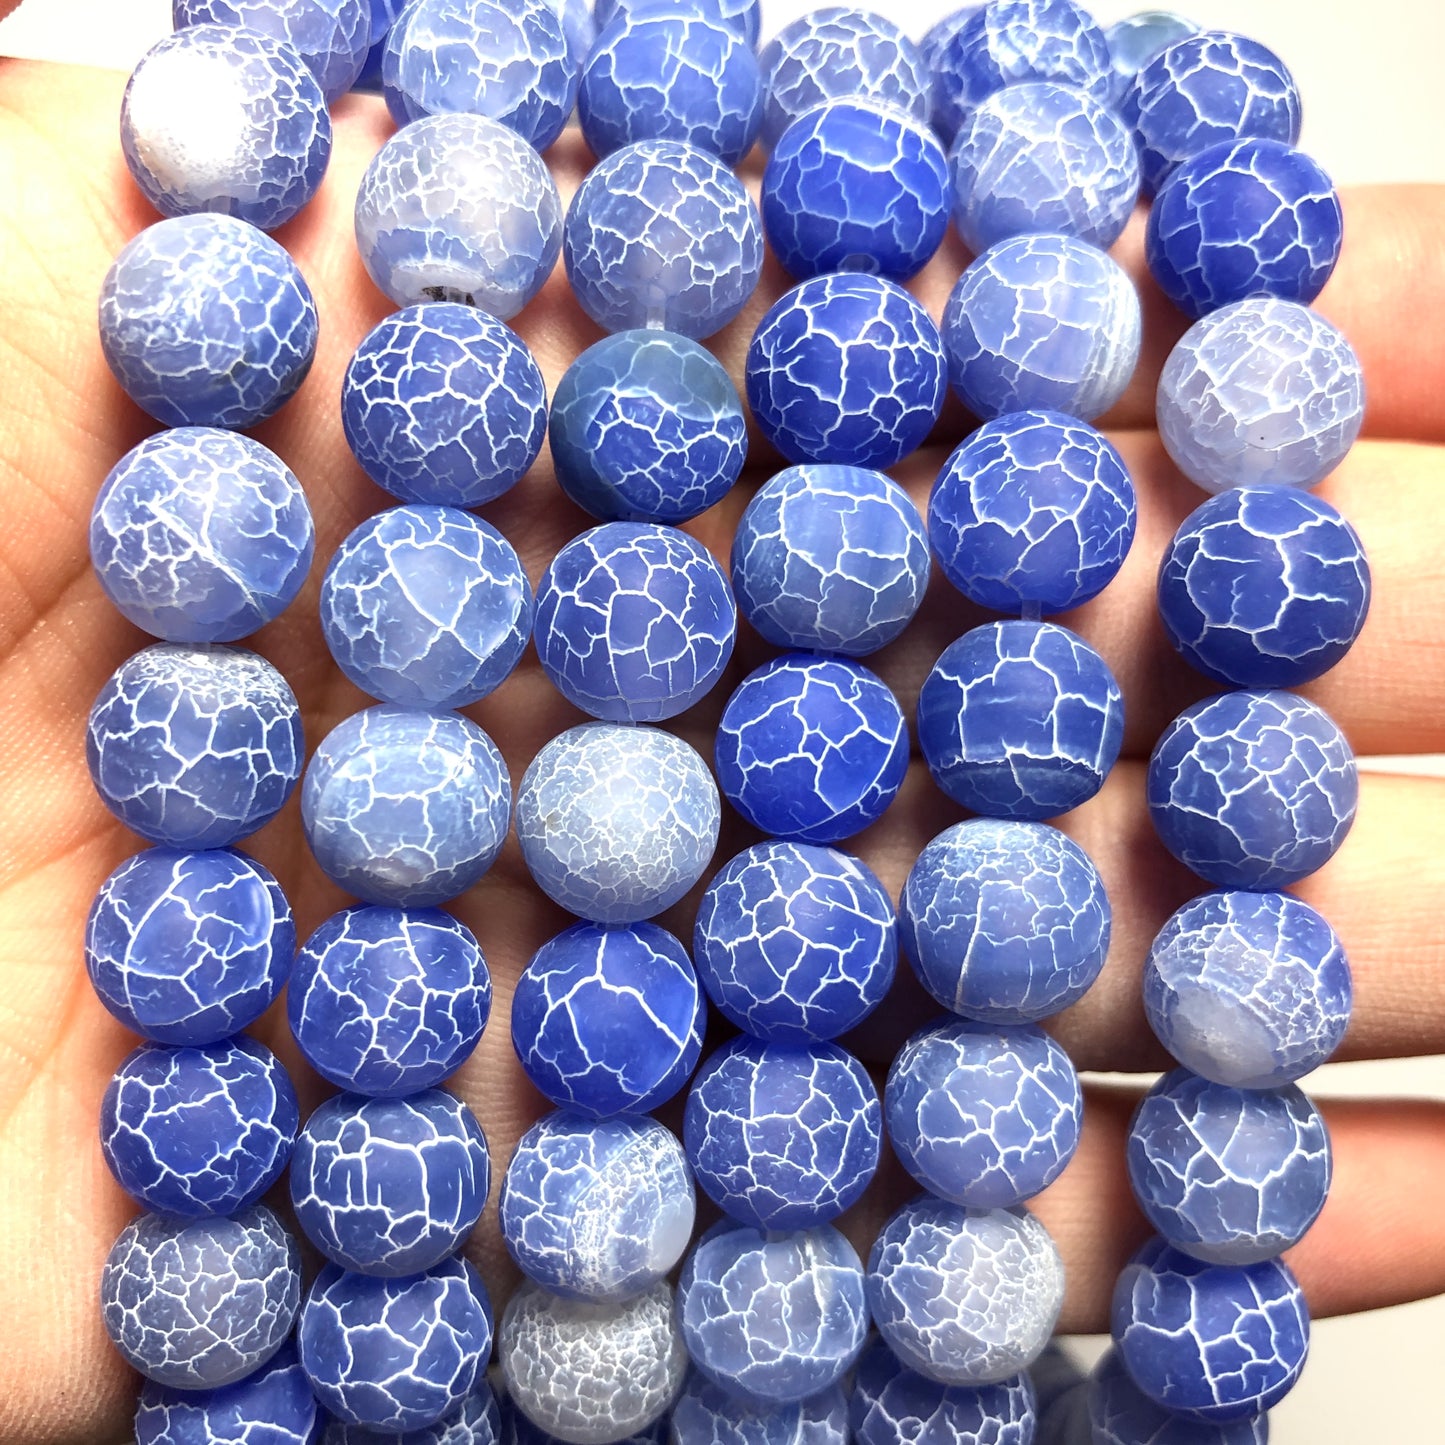 2 Strands/lot 10mm Blue Frosted Matte Cracked Agate Round Stone Beads Stone Beads New Beads Arrivals Round Agate Beads Charms Beads Beyond